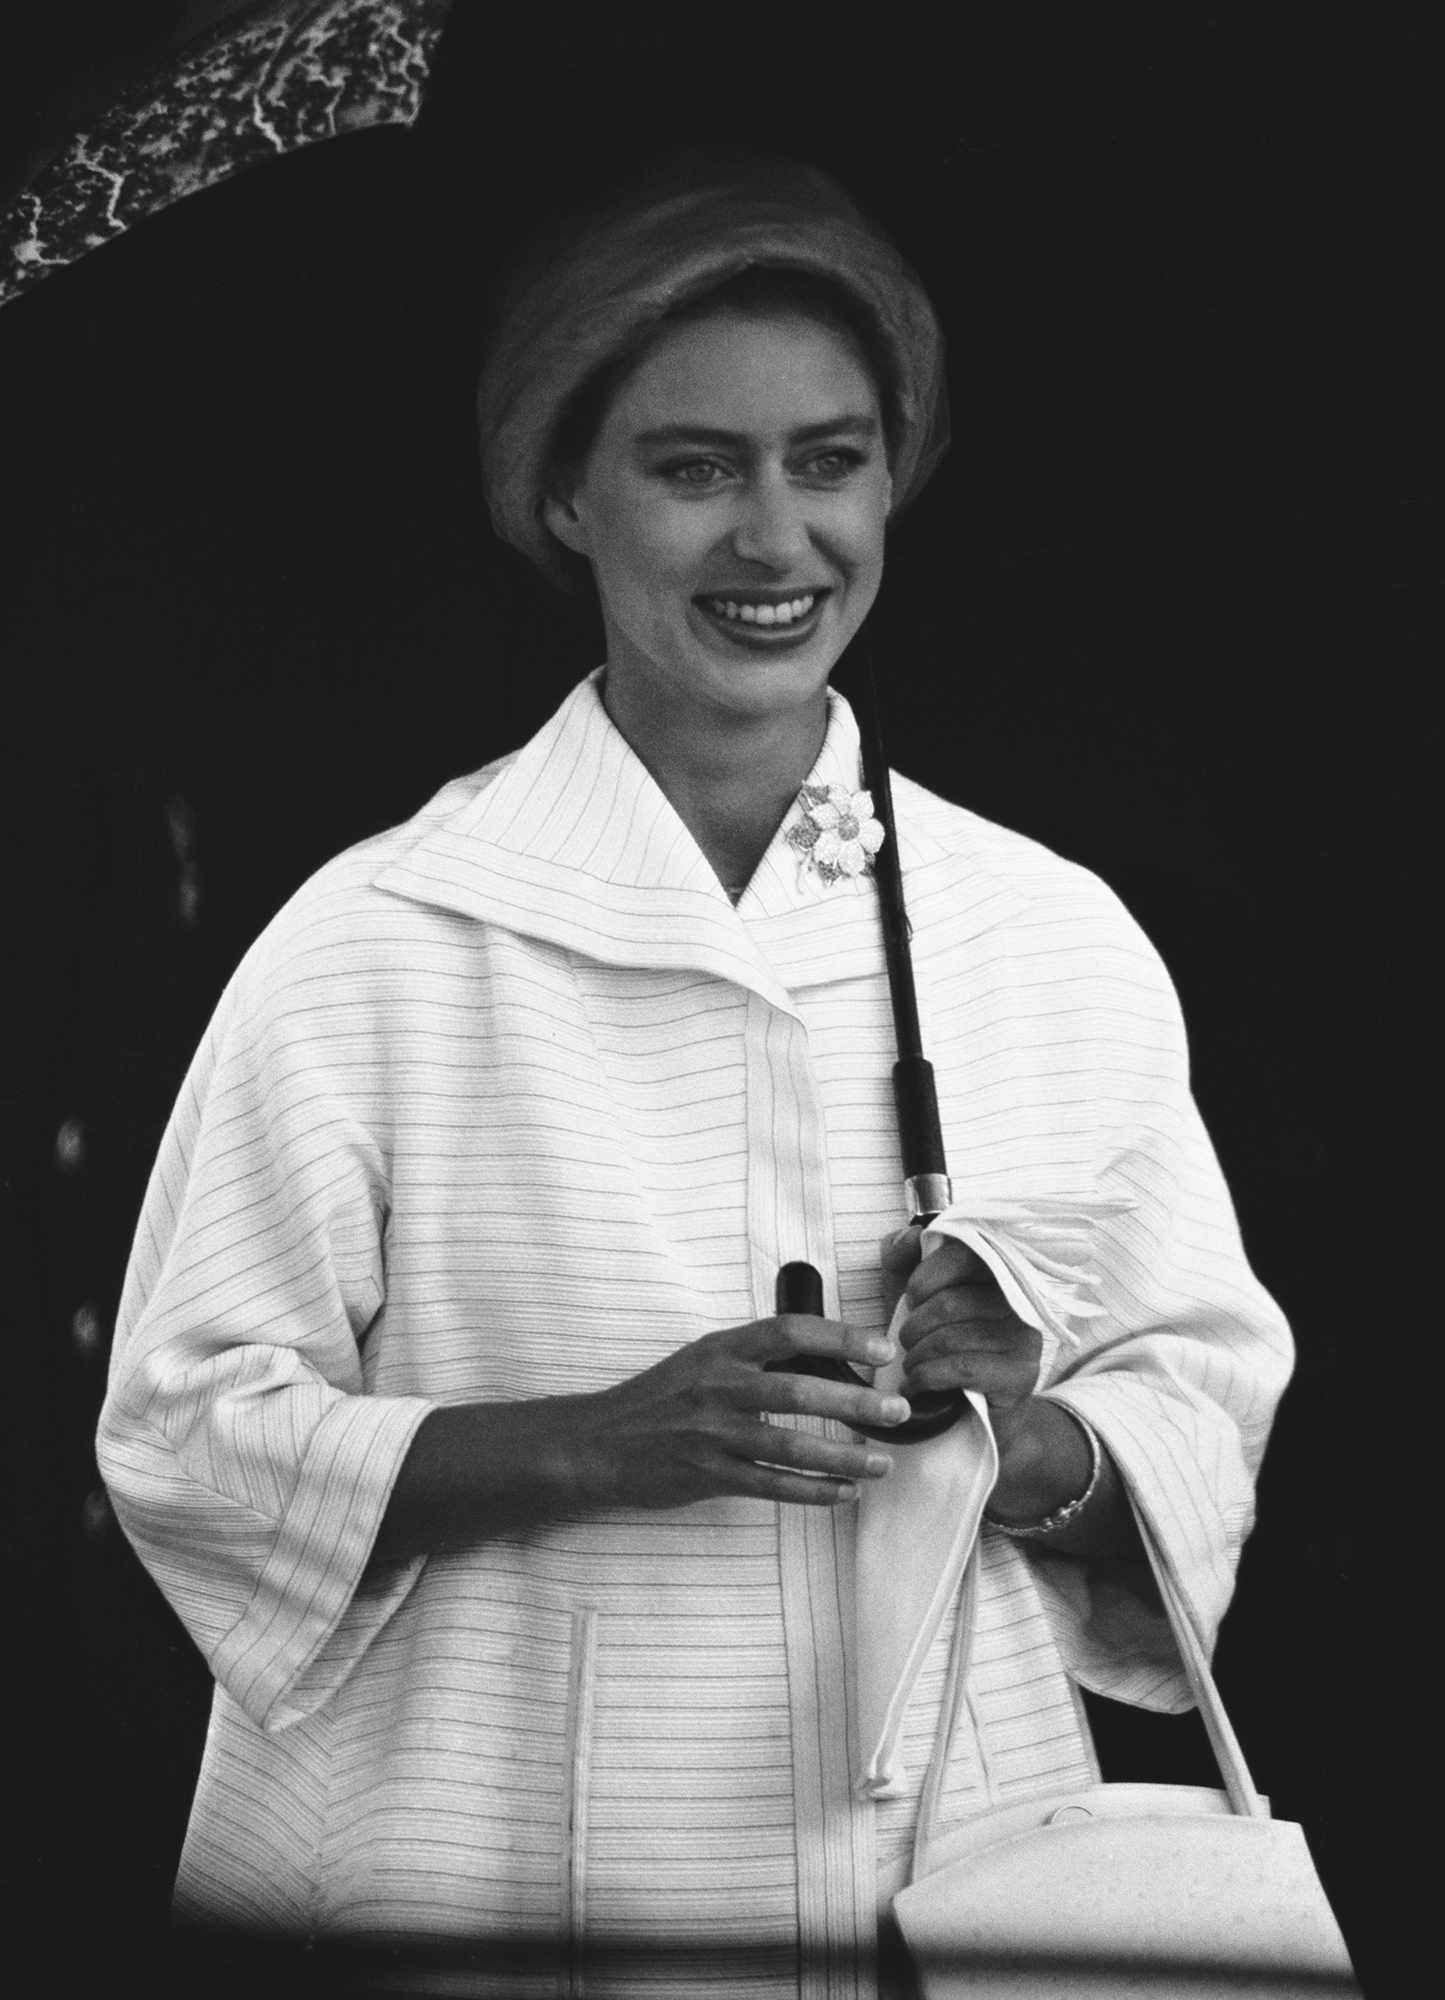 Princess Margaret, Countess of Snowdon (1930 - 2002) arrives in England after her tour of Canada, 12th August 1958